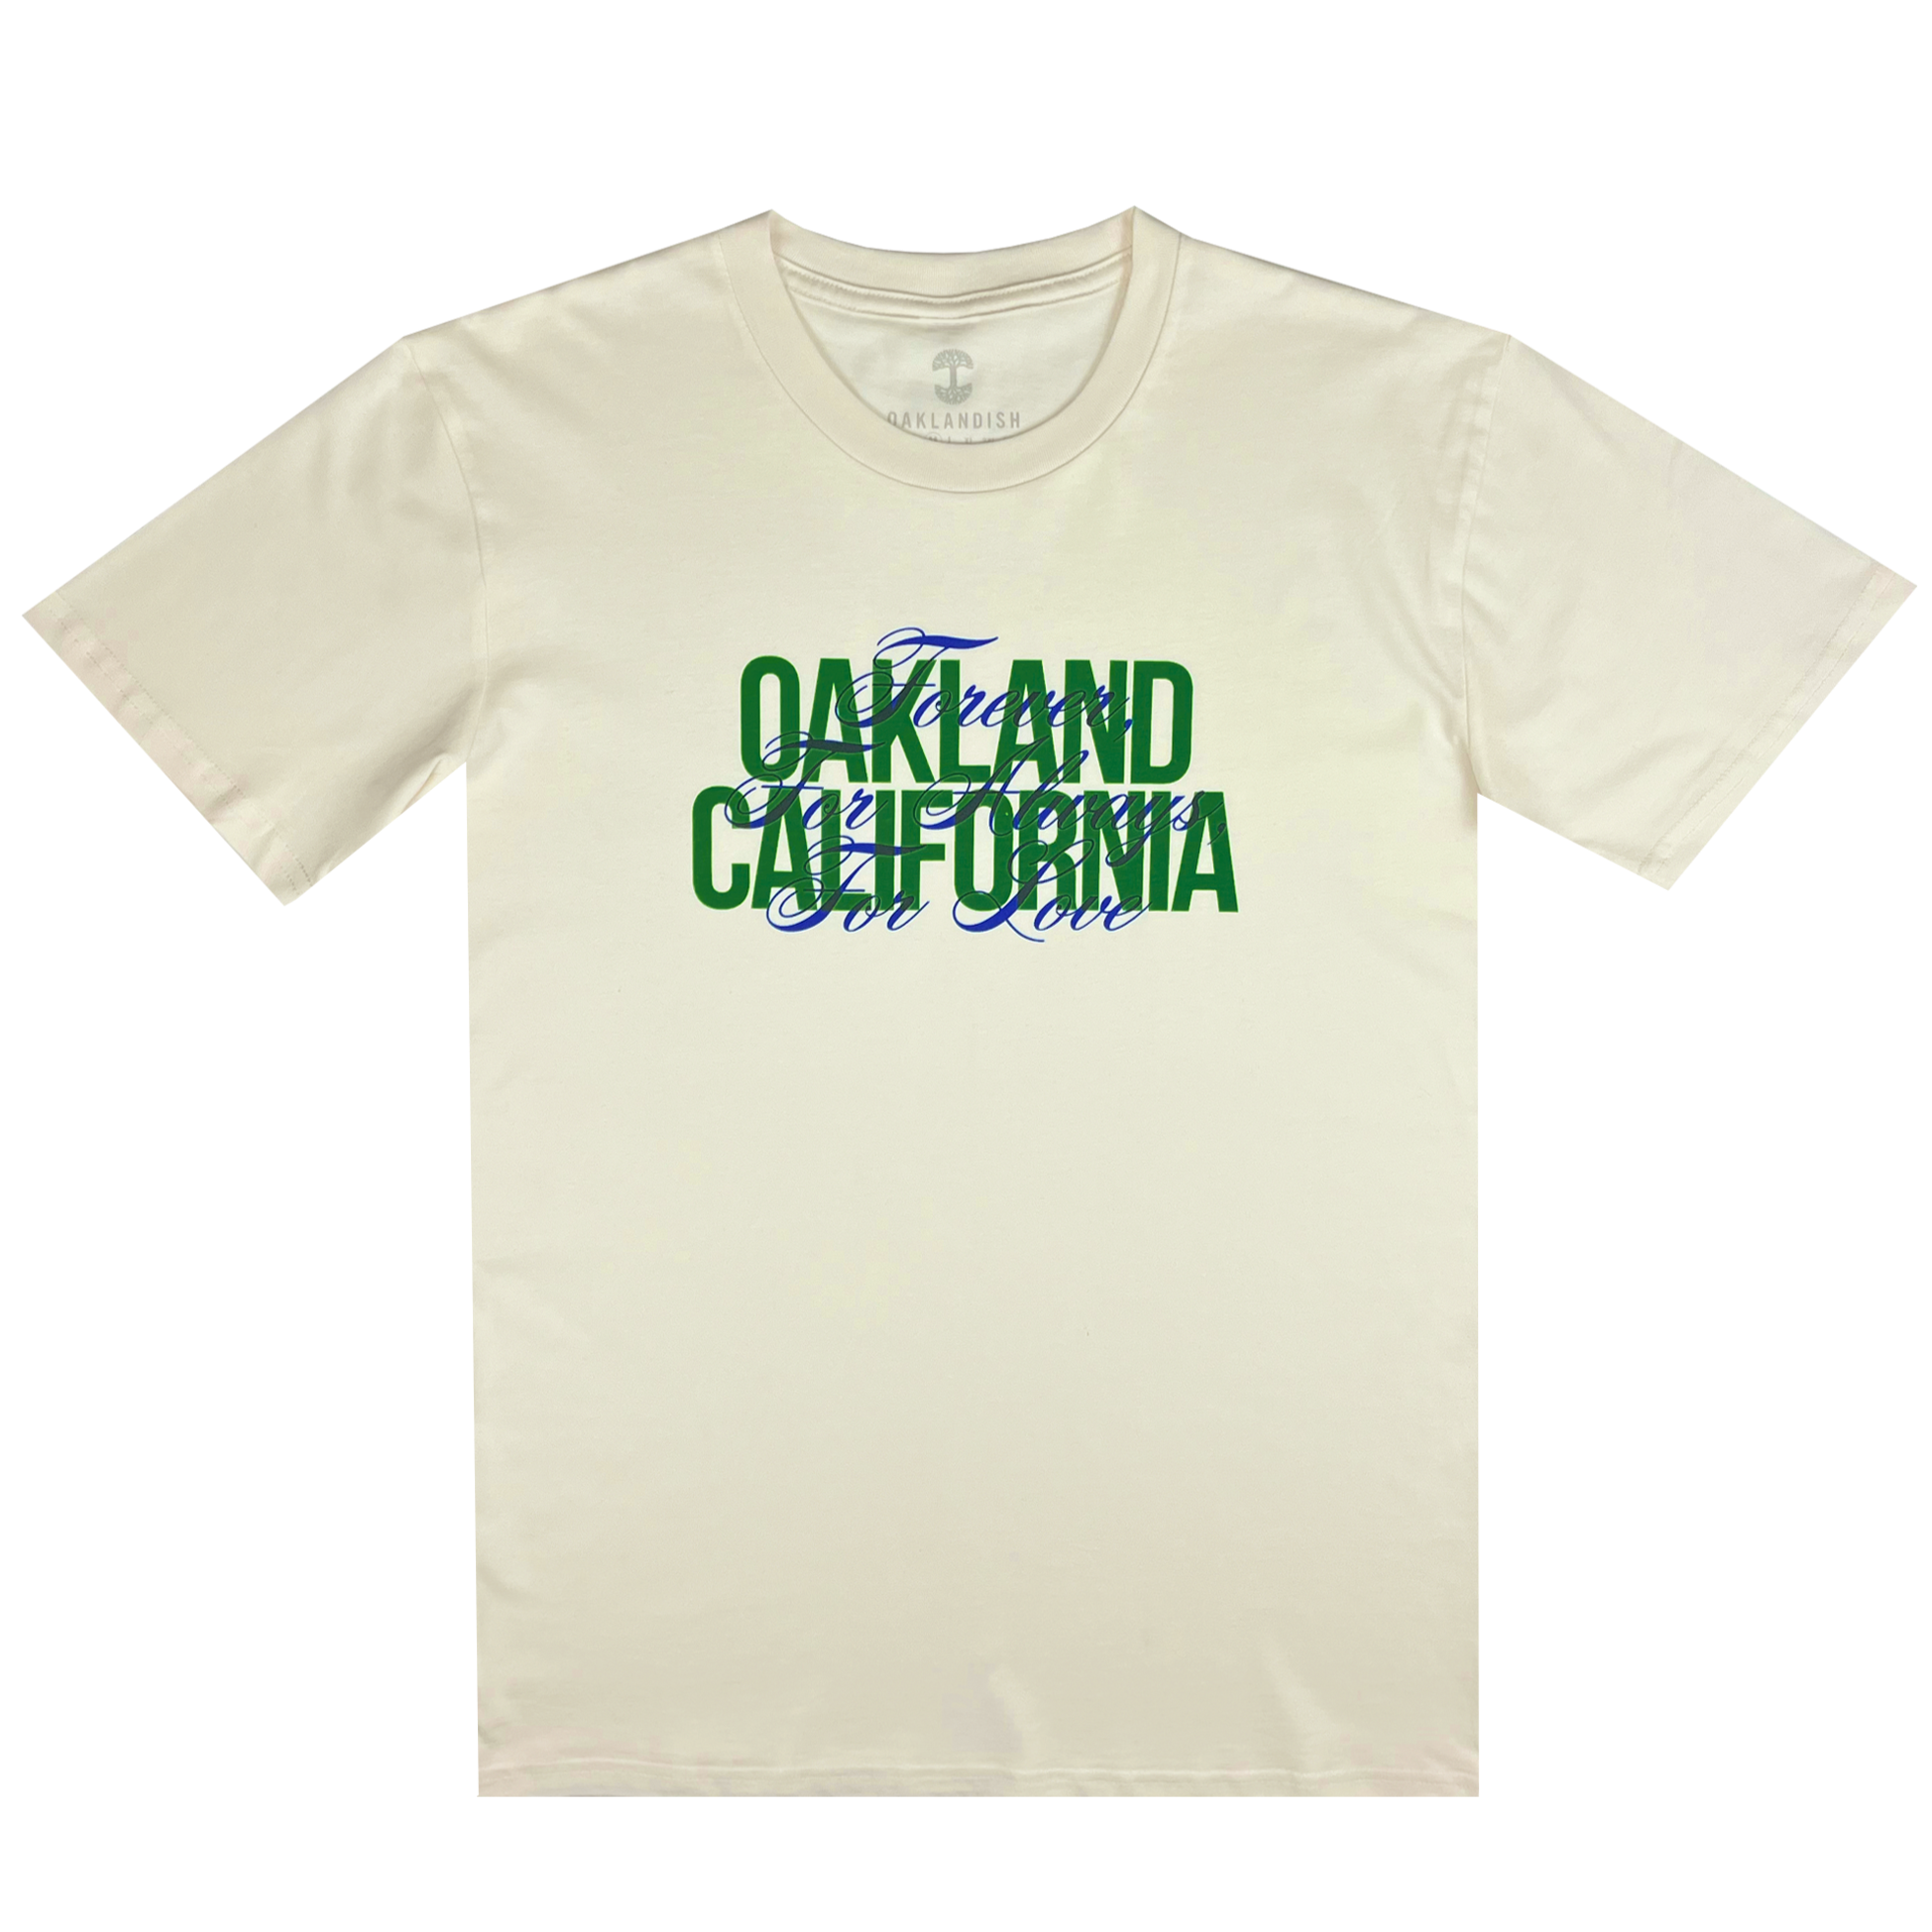 New Oakland Forever Jerseys Photo Gallery